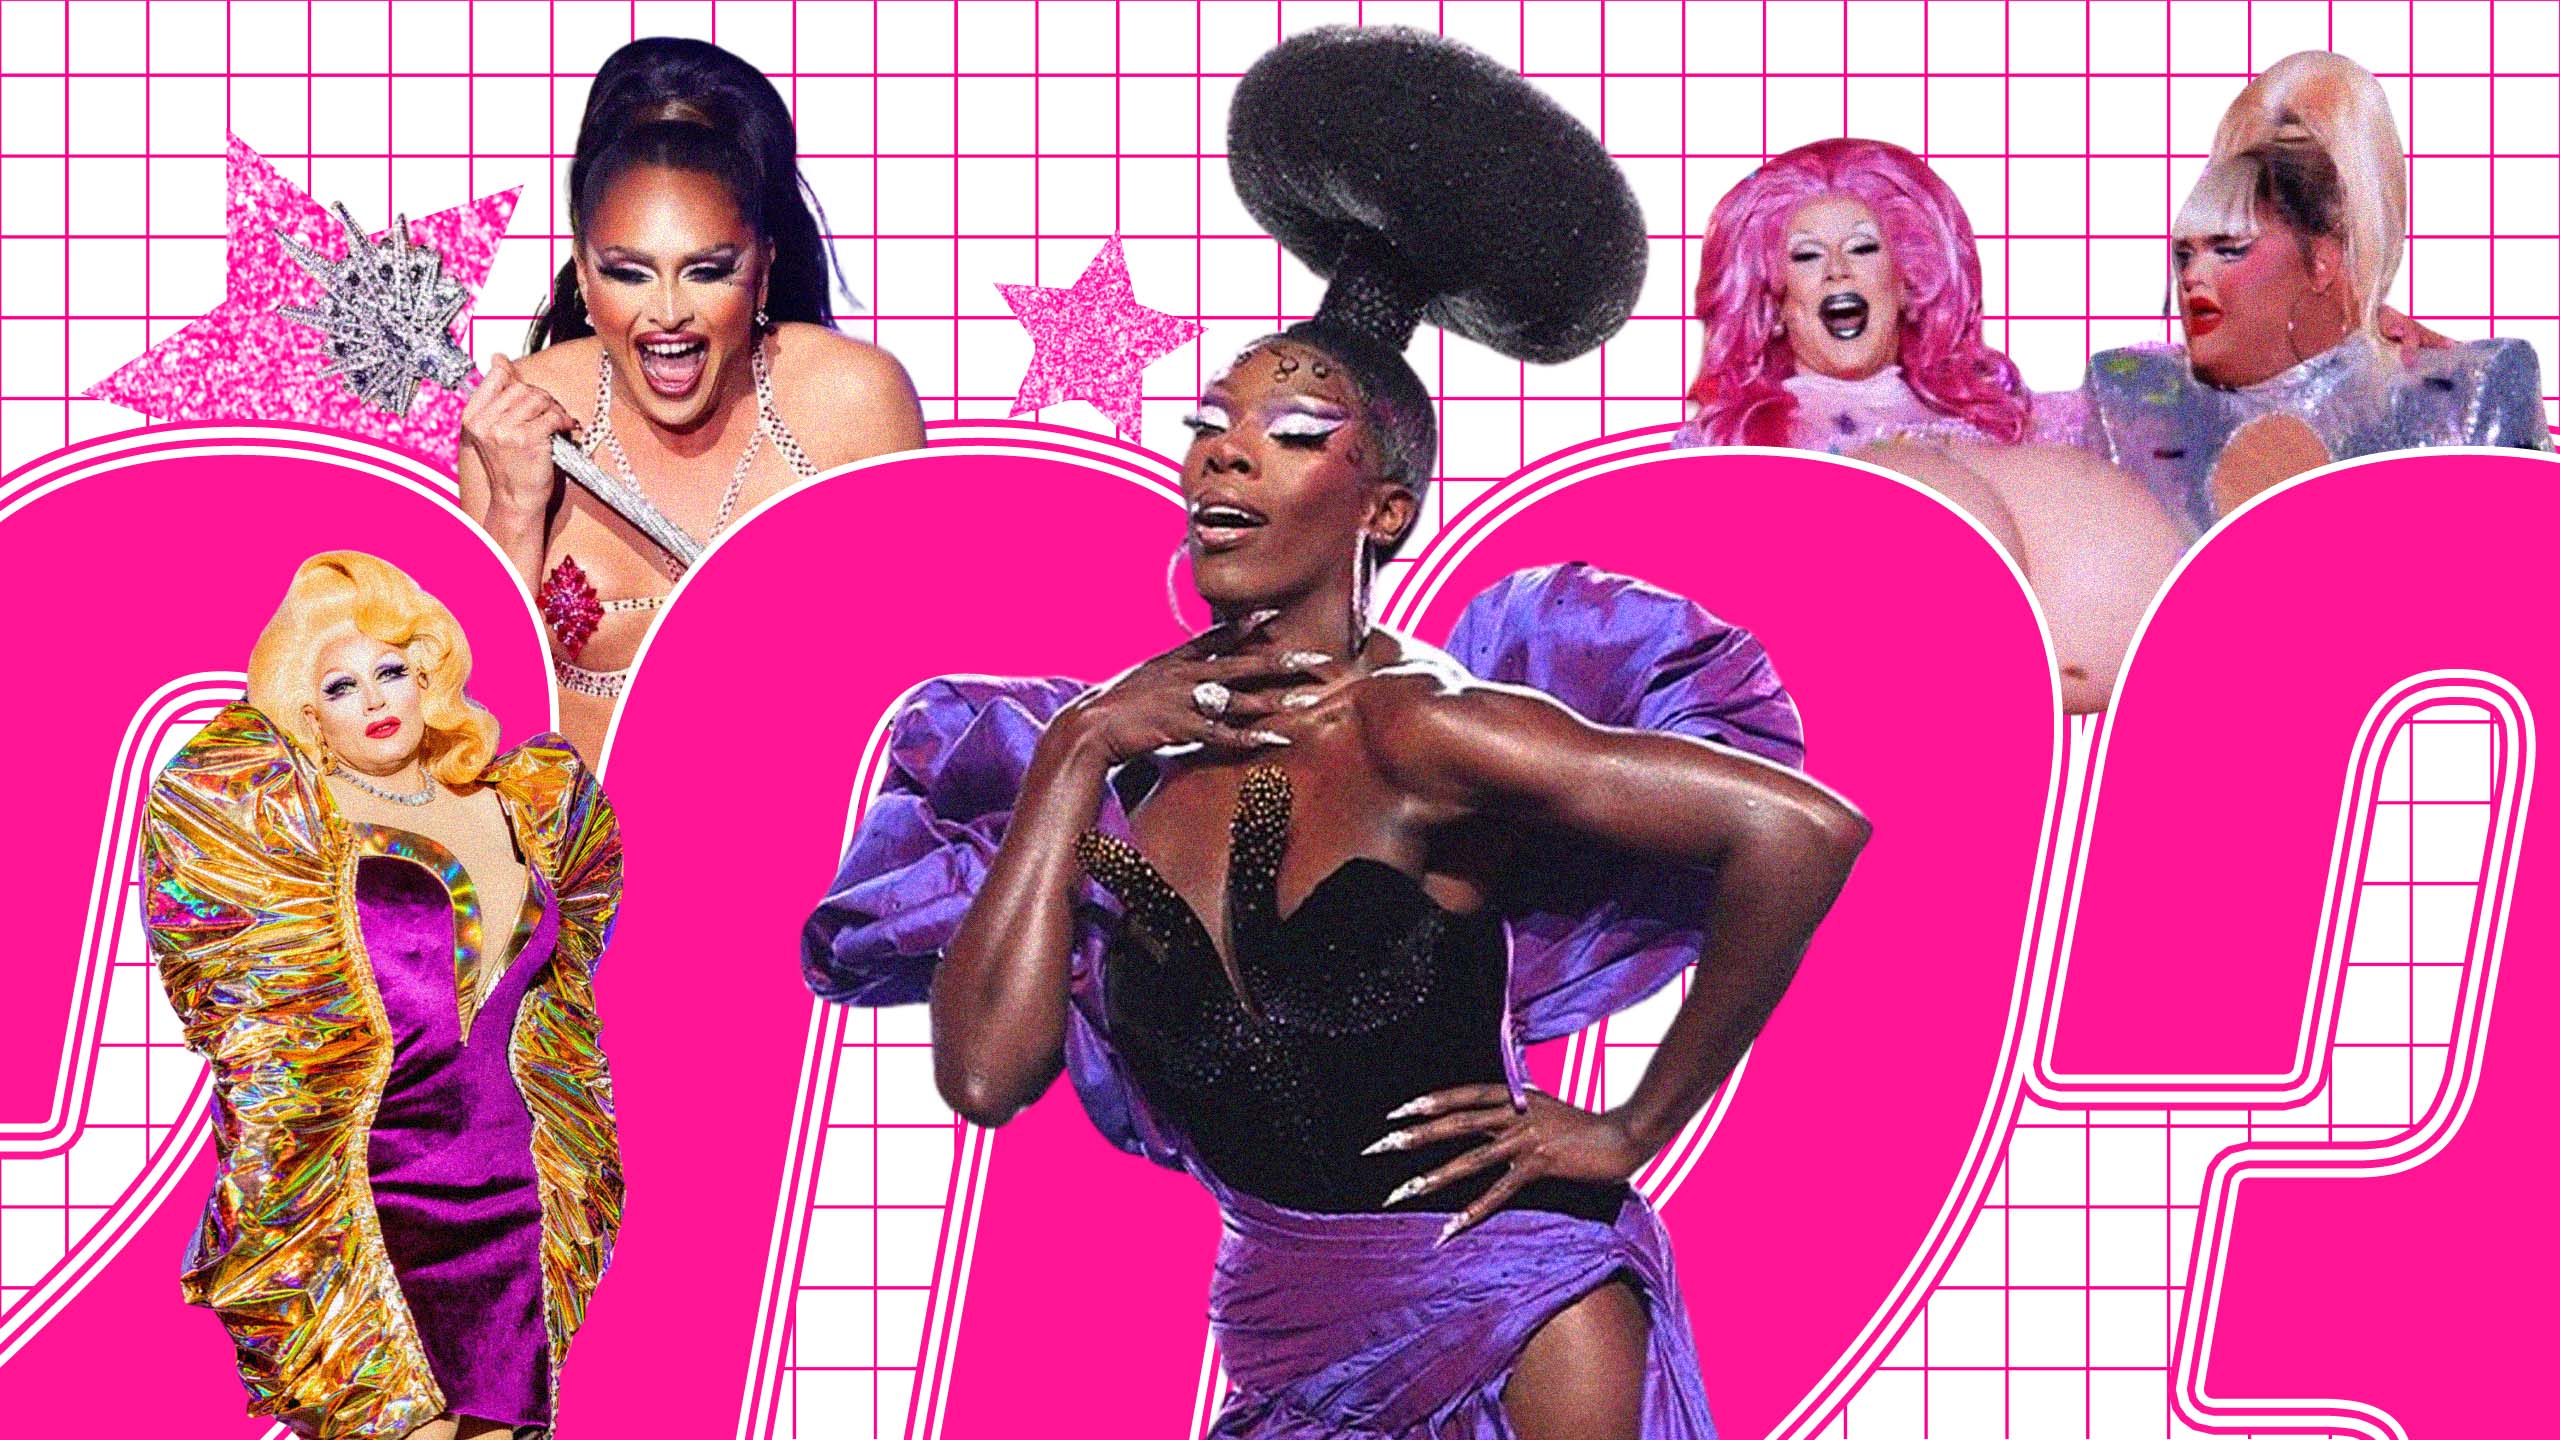 Our power ranking of all 14 seasons of 'Drag Race' that aired in